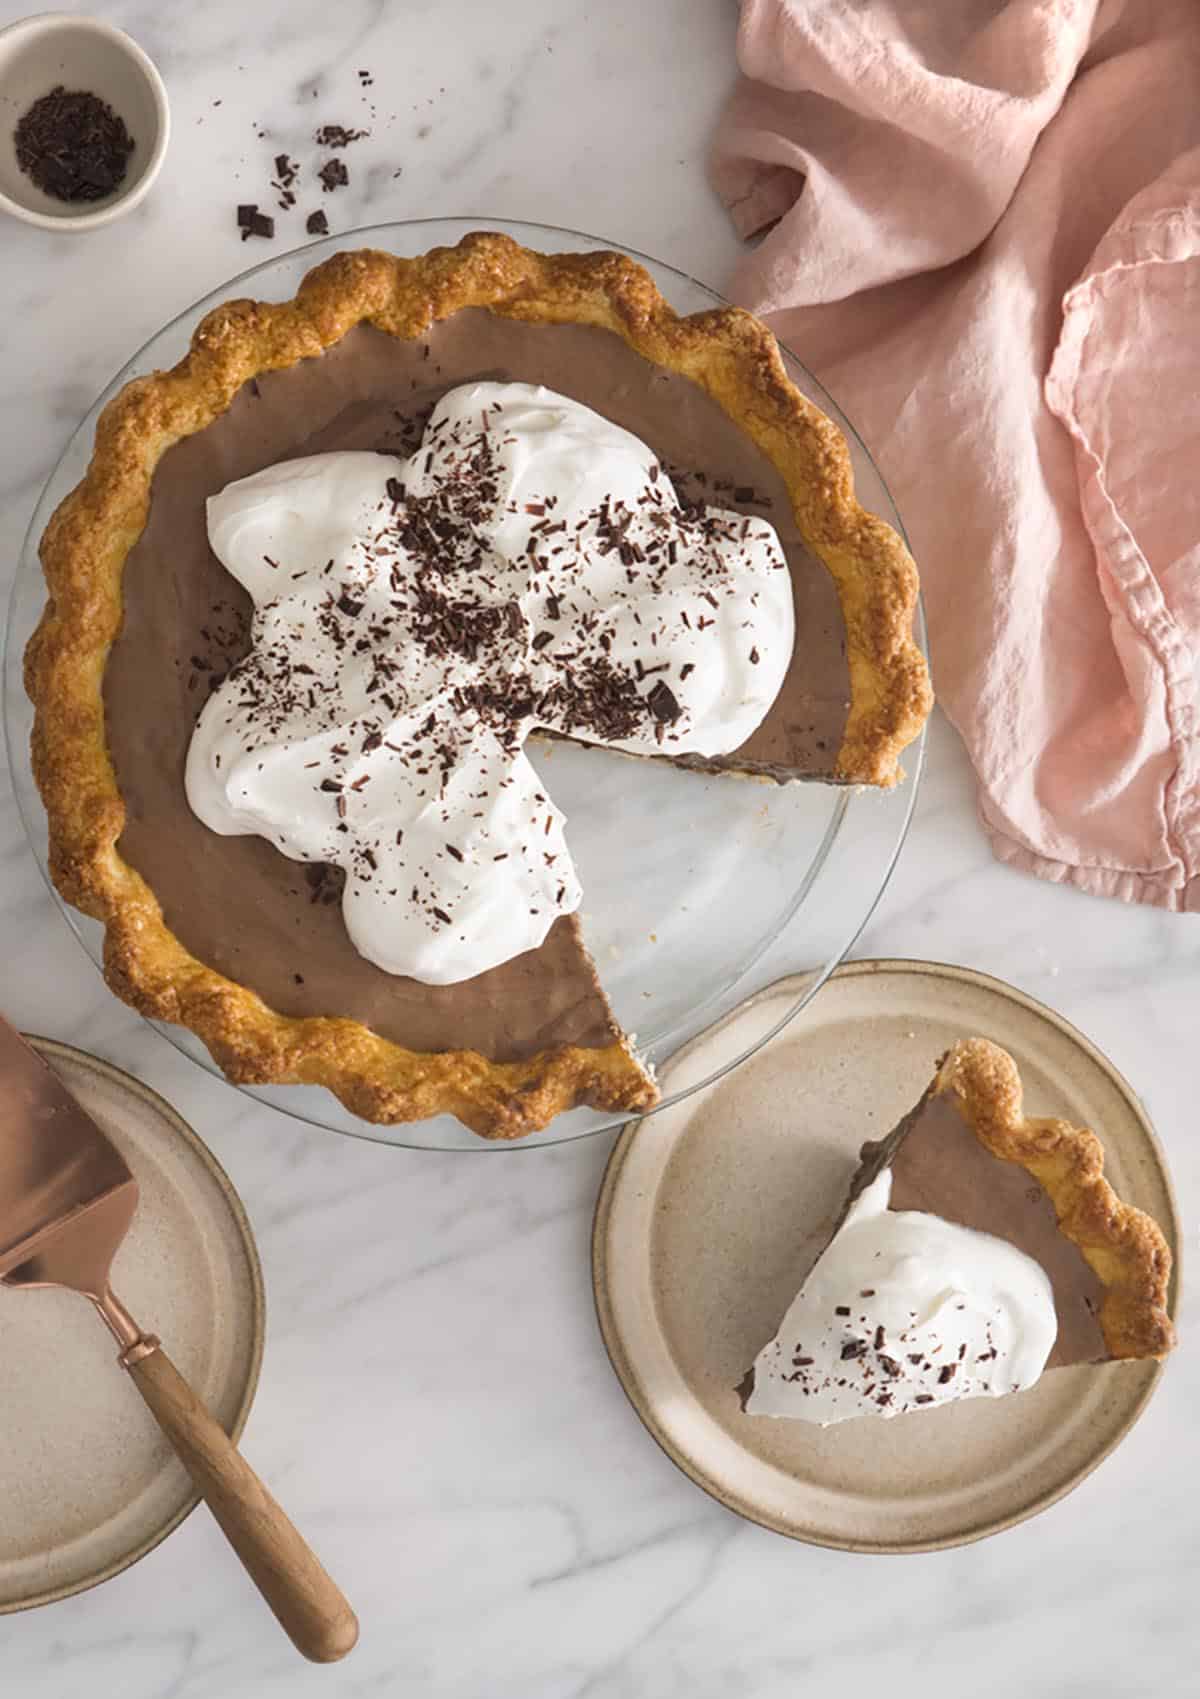 A top down photo of a chocolate pie covered in whipped cream and shaved chocolate.A top down photo of a chocolate pie covered in whipped cream and shaved chocolate.